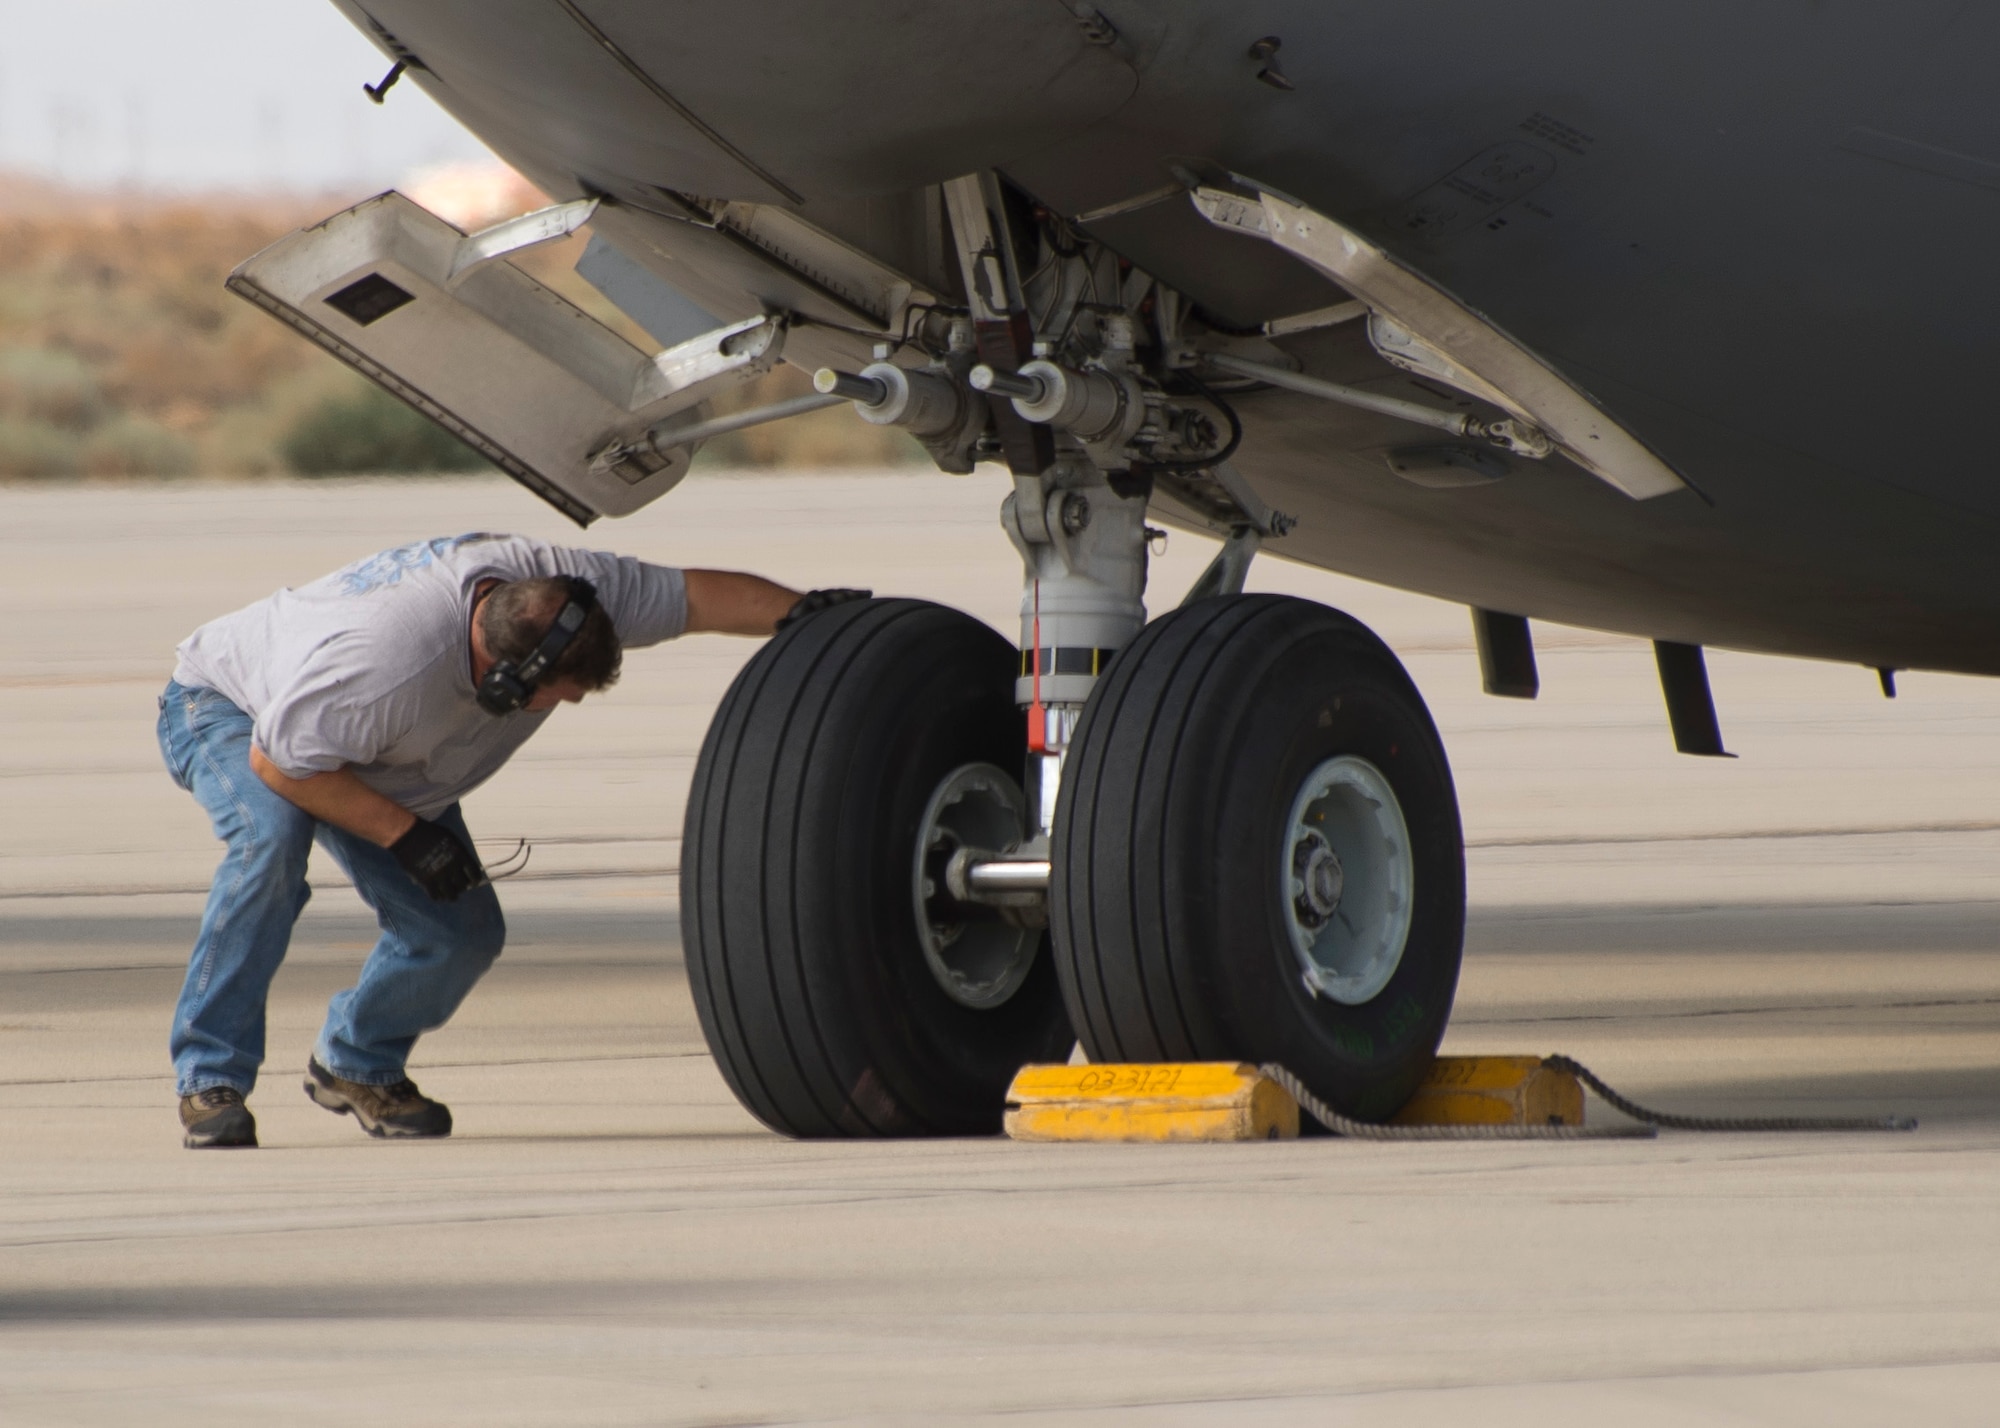 A 418th Flight Test Squadron crew chief inspects a C-17 Globemaster III’s new Dunlop tires during a tire test Aug. 20, 2014, on the flightline at Edwards Air Force Base, Calif. Since August, the C-17 Global Reach Integrated Test Team at Edwards AFB has been putting the C-17’s new Dunlop tires through the rigors of testing to ensure the aircraft’s capability remains intact well into the future. (U.S. Air Force photo/Ethan Wagner)